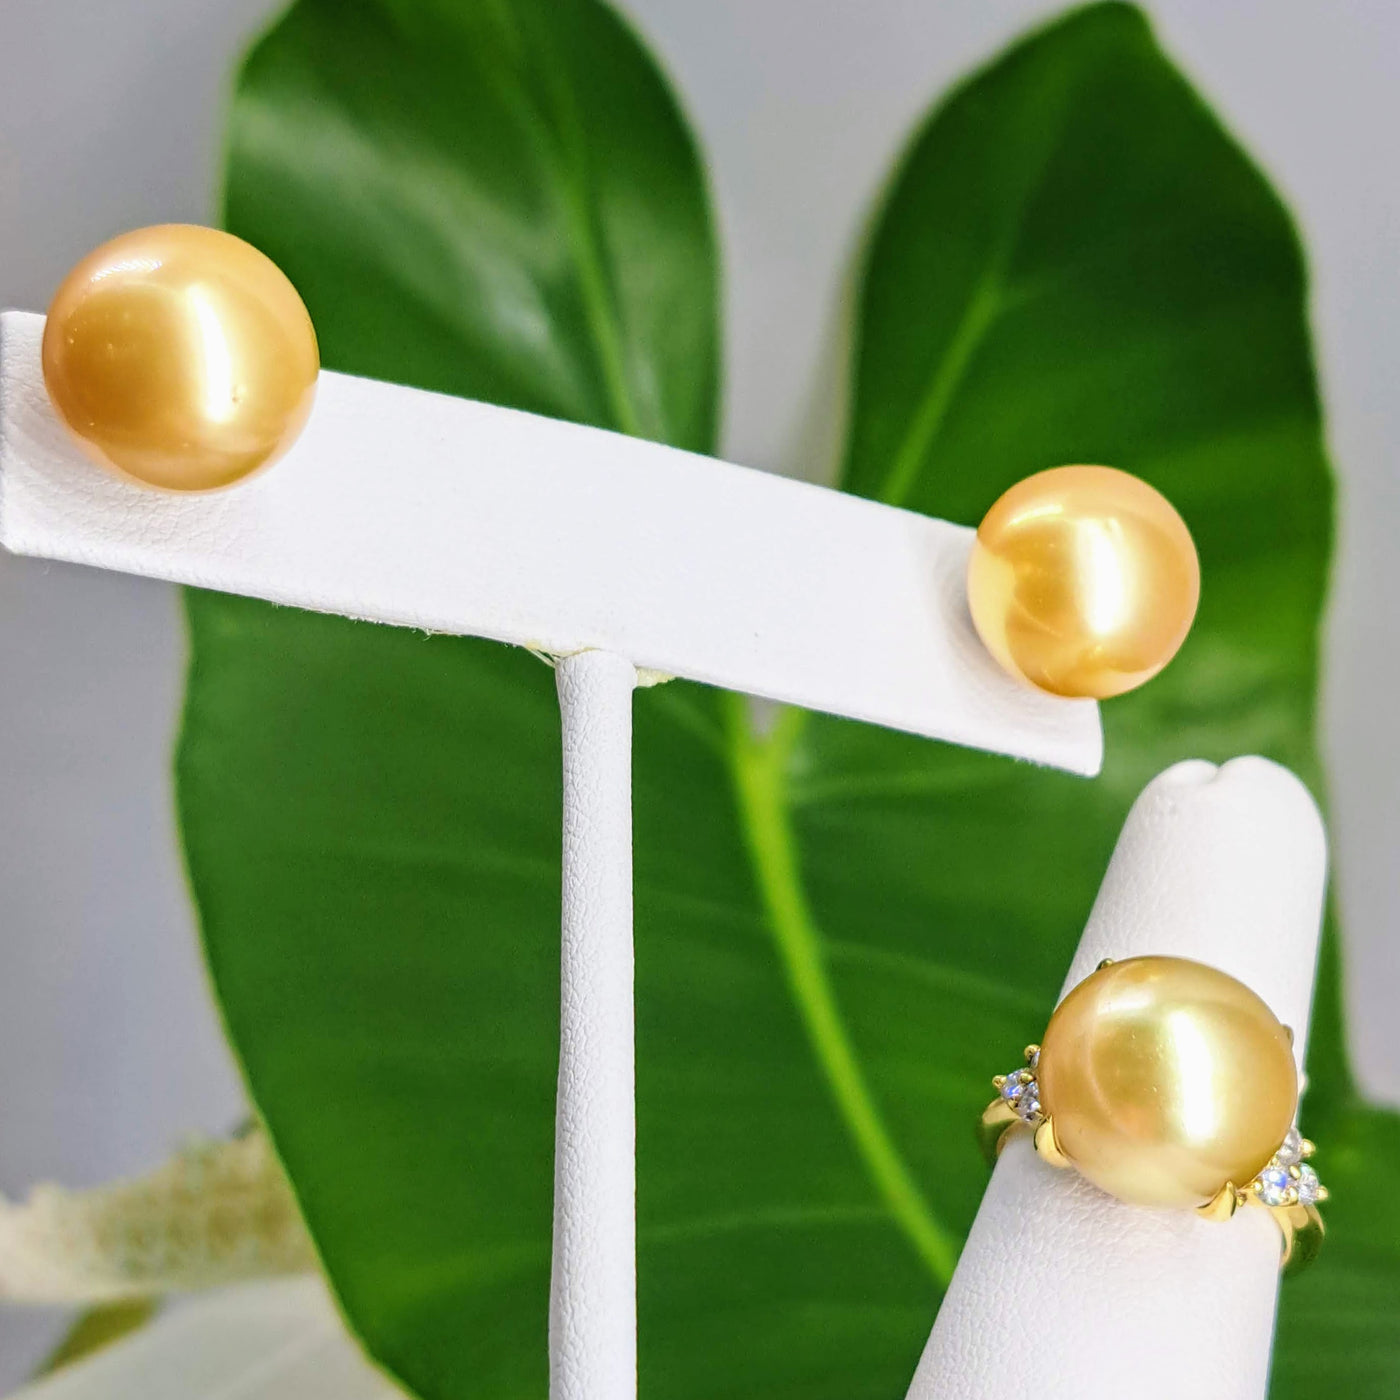 "Goldens" 13mm Stud Earrings - South Sea Golden Pearls, (Specialty Backs Included)